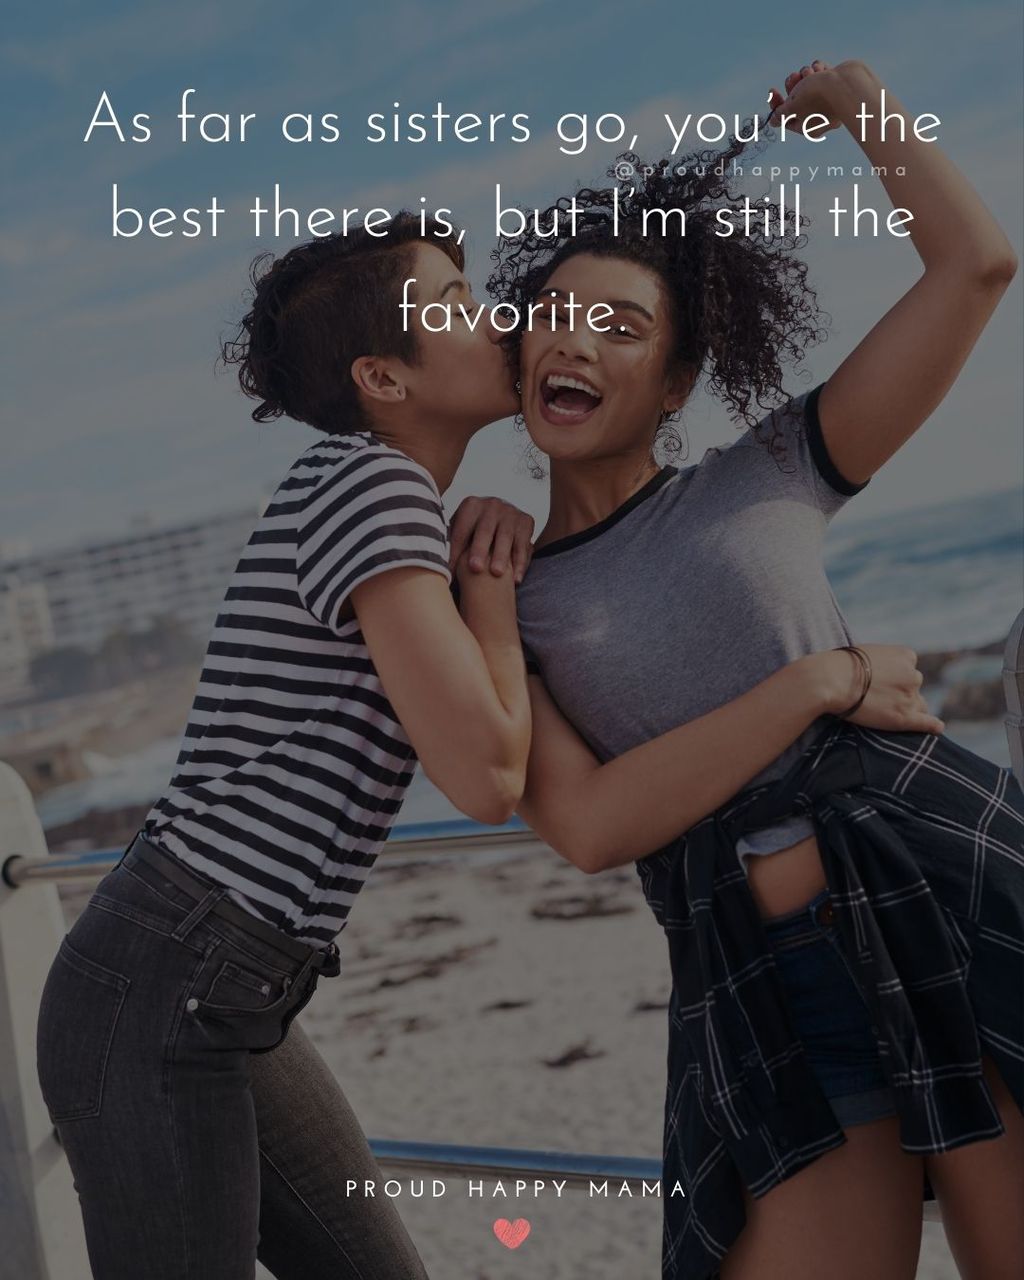 Sister Quotes - As far as sisters go, youre the best there is, but Im still the favorite.